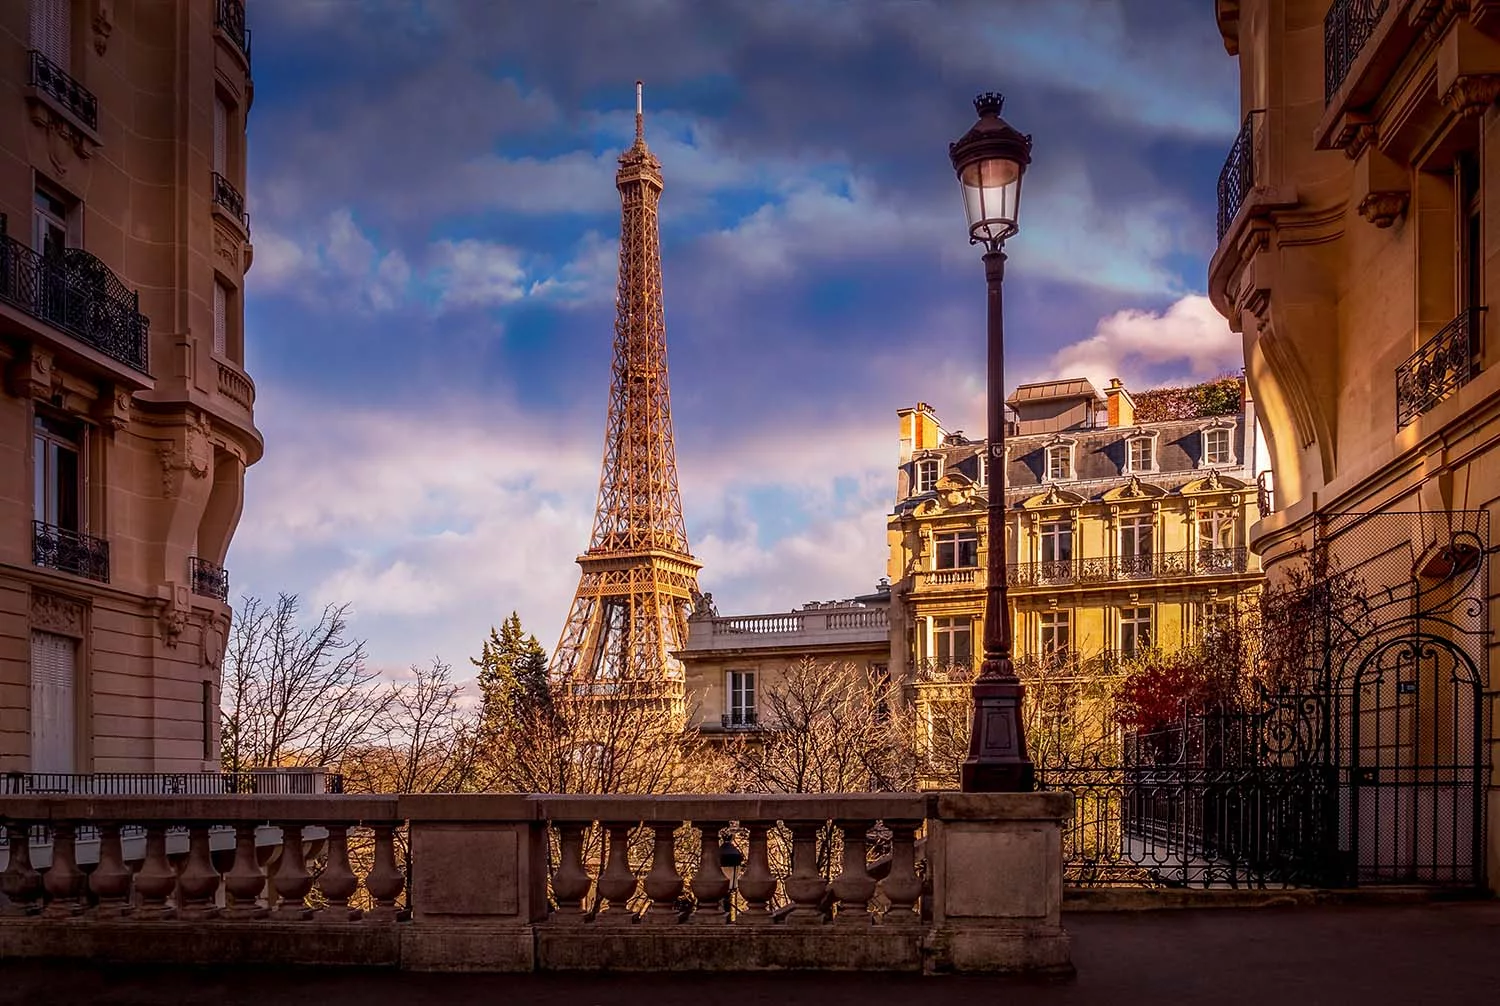 Where to View the Paris Skyline: Best Locations, Photos, Map